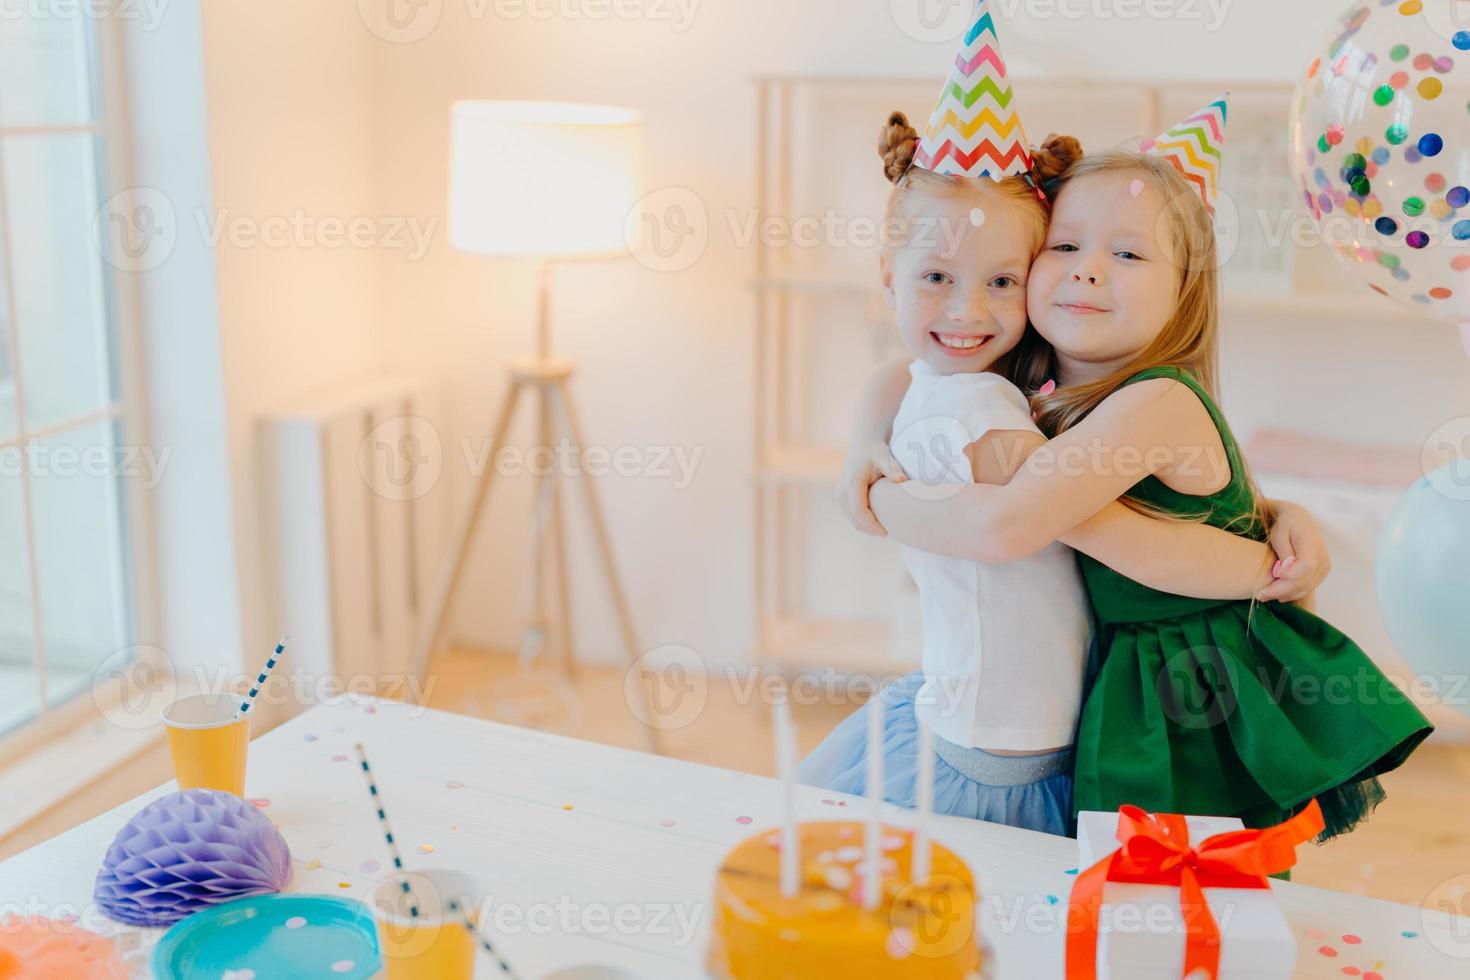 Friendly two girls embrace and have good relationship, stand near festive table with cake, celebrate birthday together, stand in living room. Glad female sisters enjoy holiday, special occasion photo